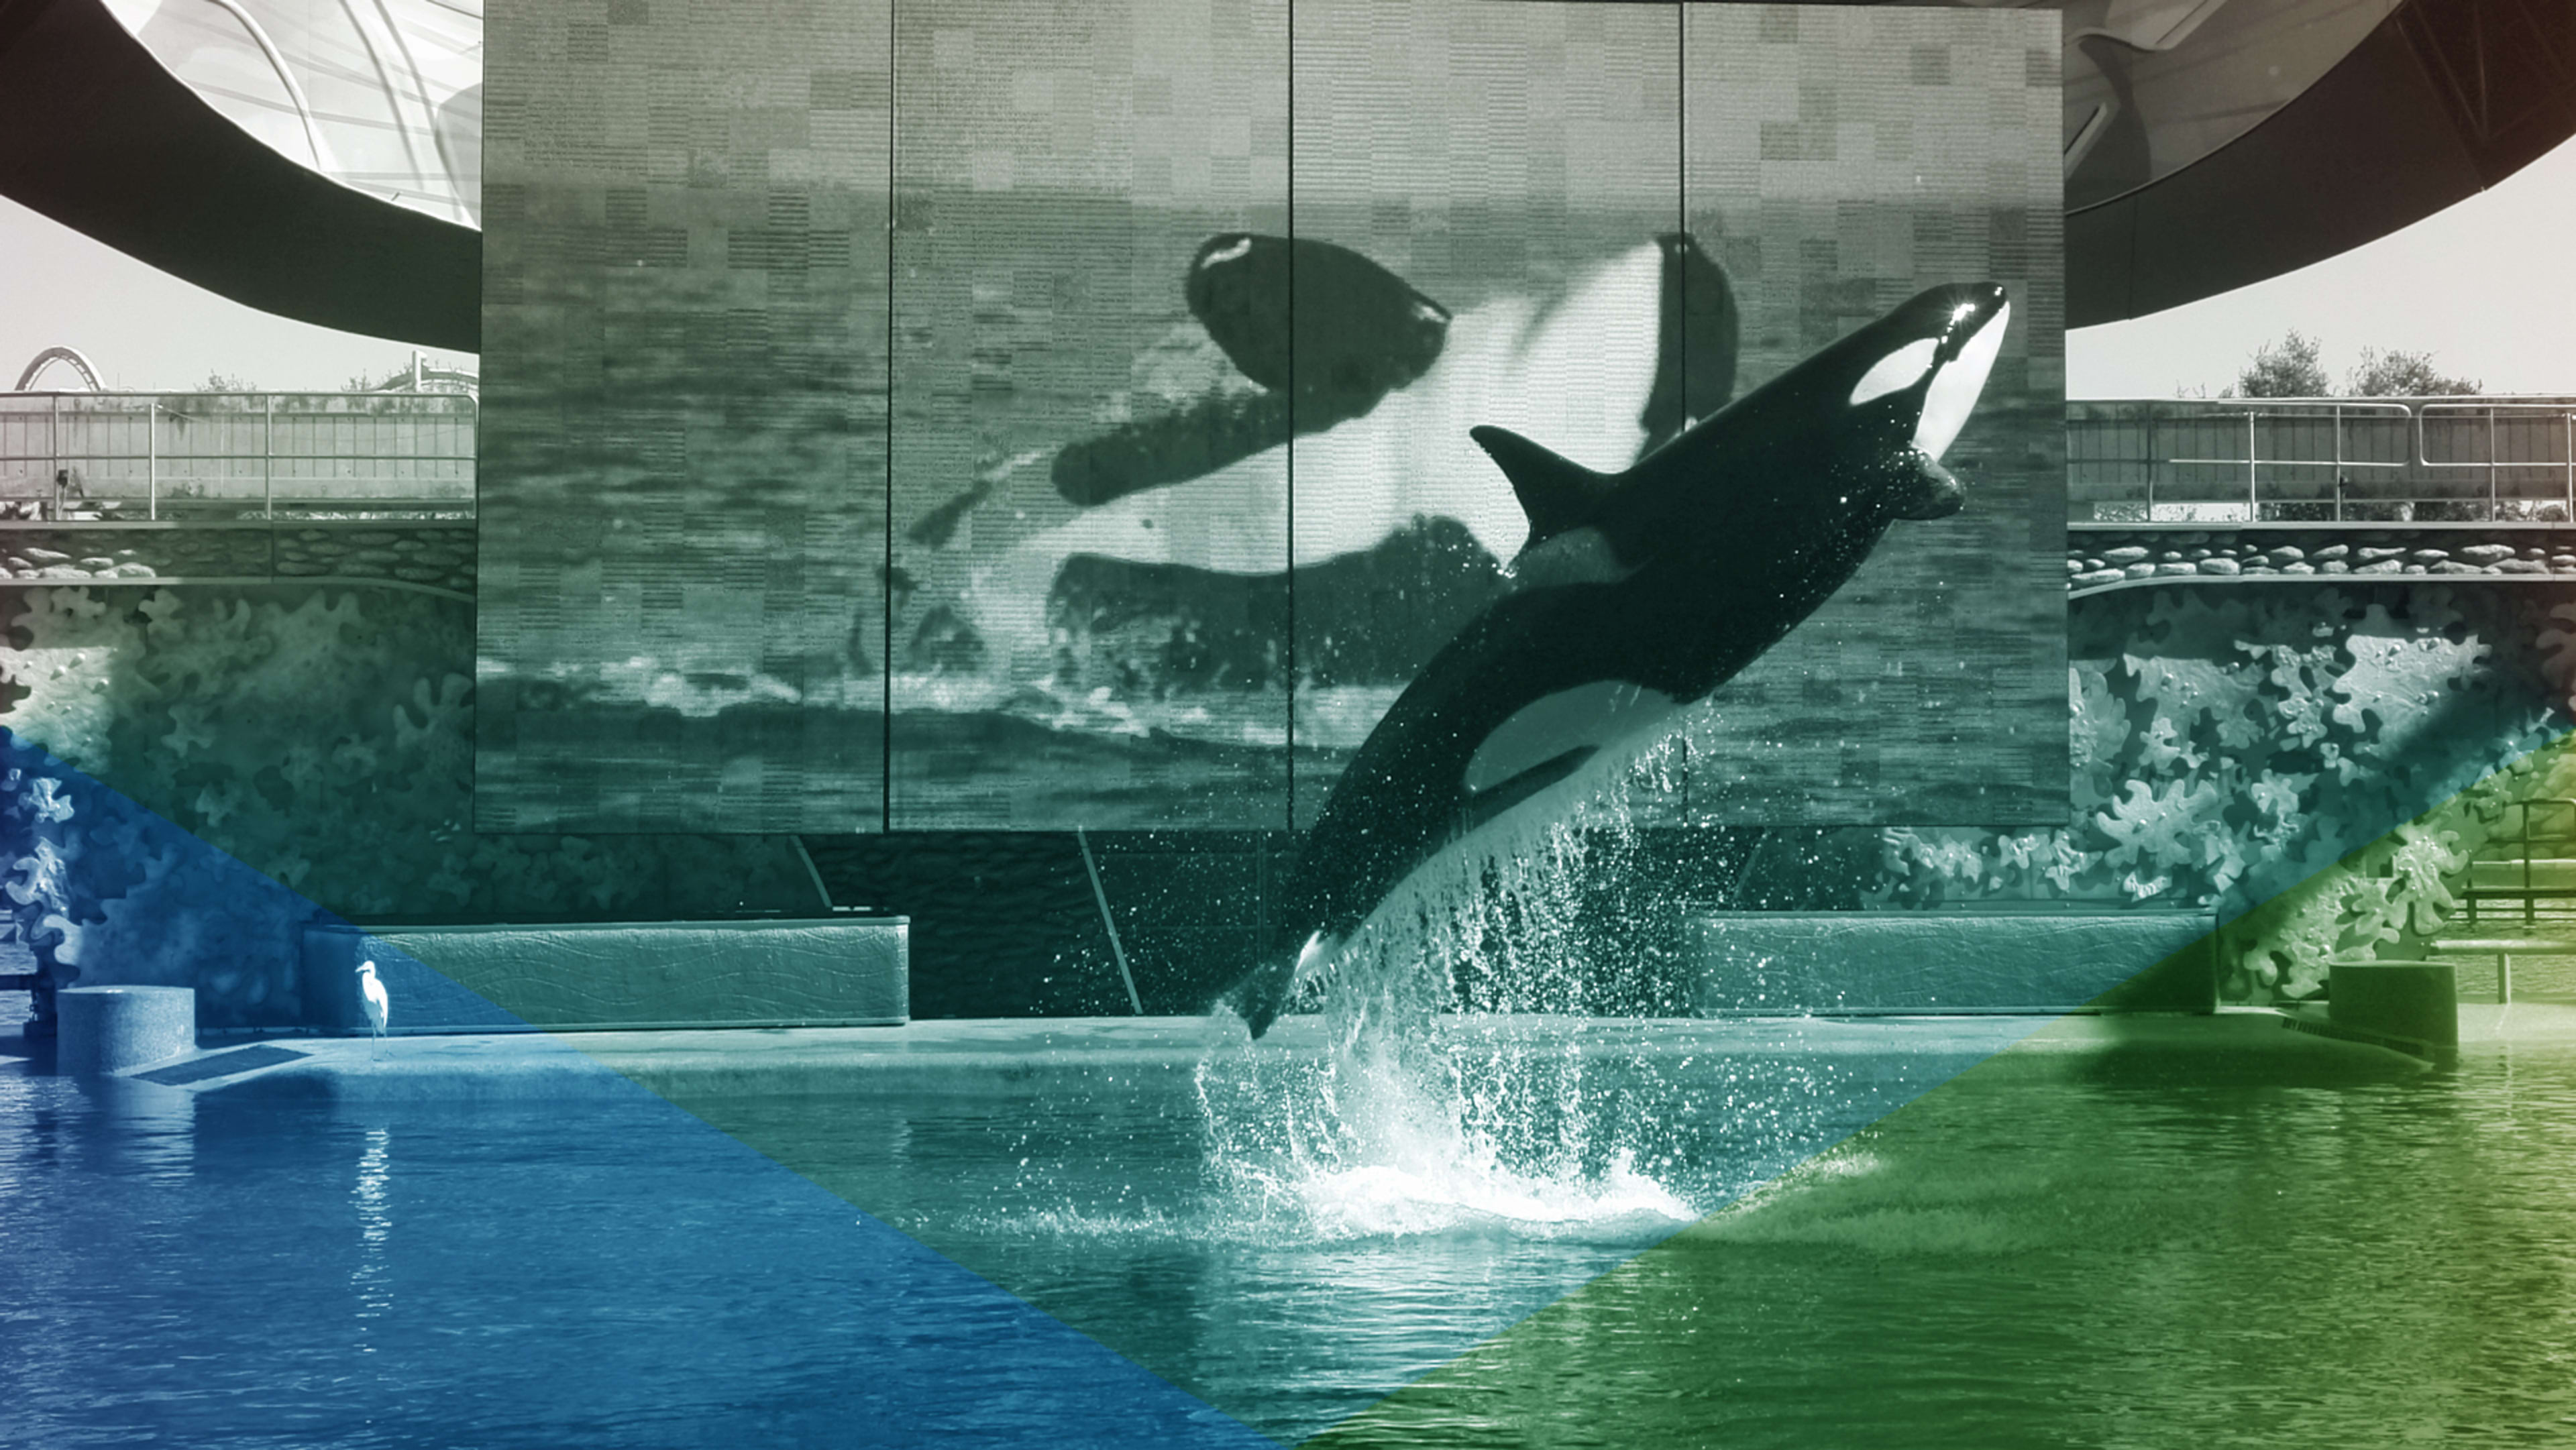 SeaWorld and its former CEO are still paying dearly for “Blackfish”